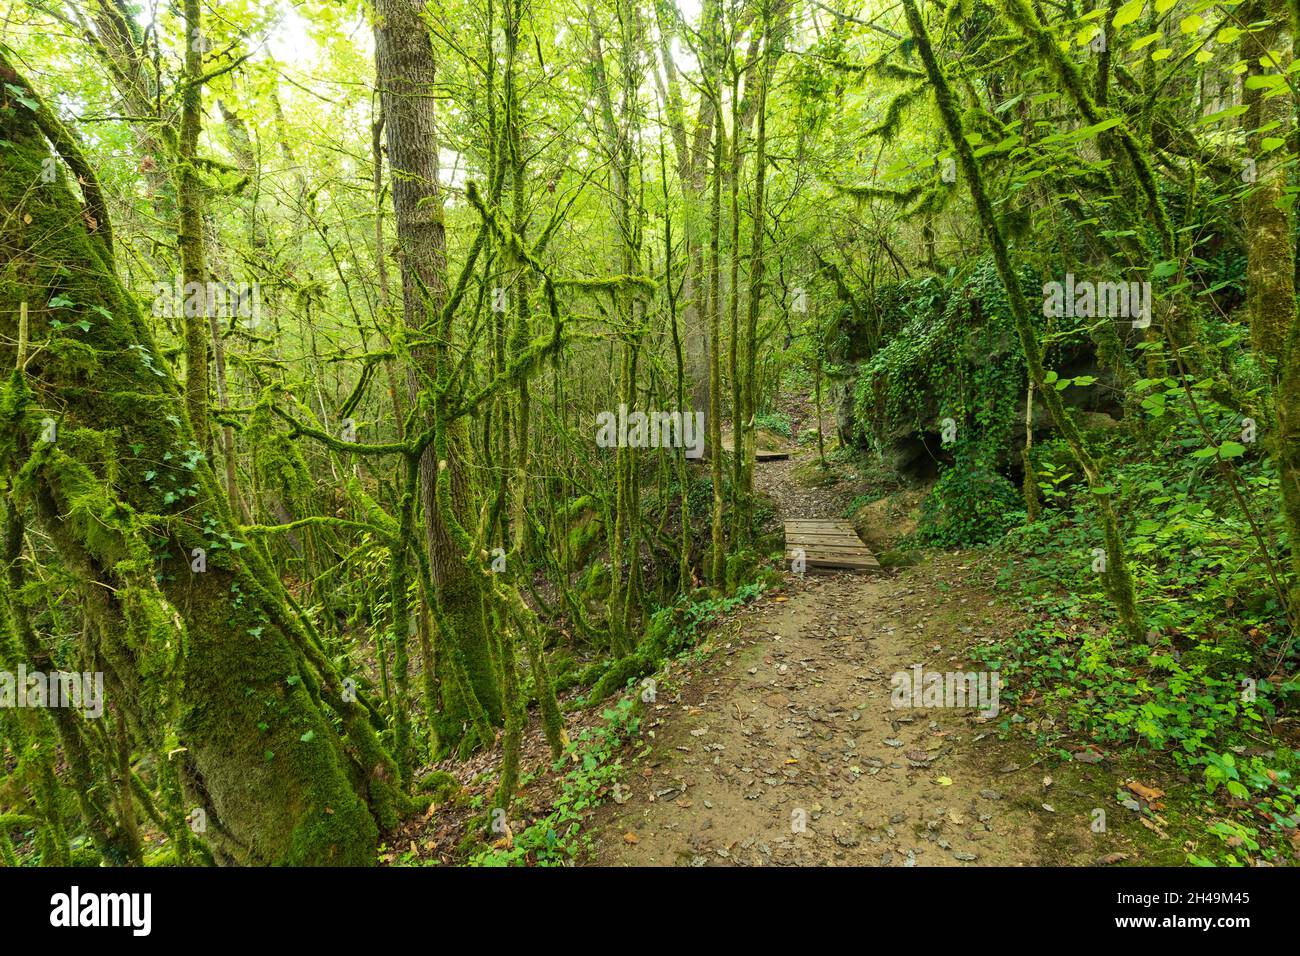 Mossy dense temperate forest of Roquefort les Cascades, Ariege, France Stock Photo